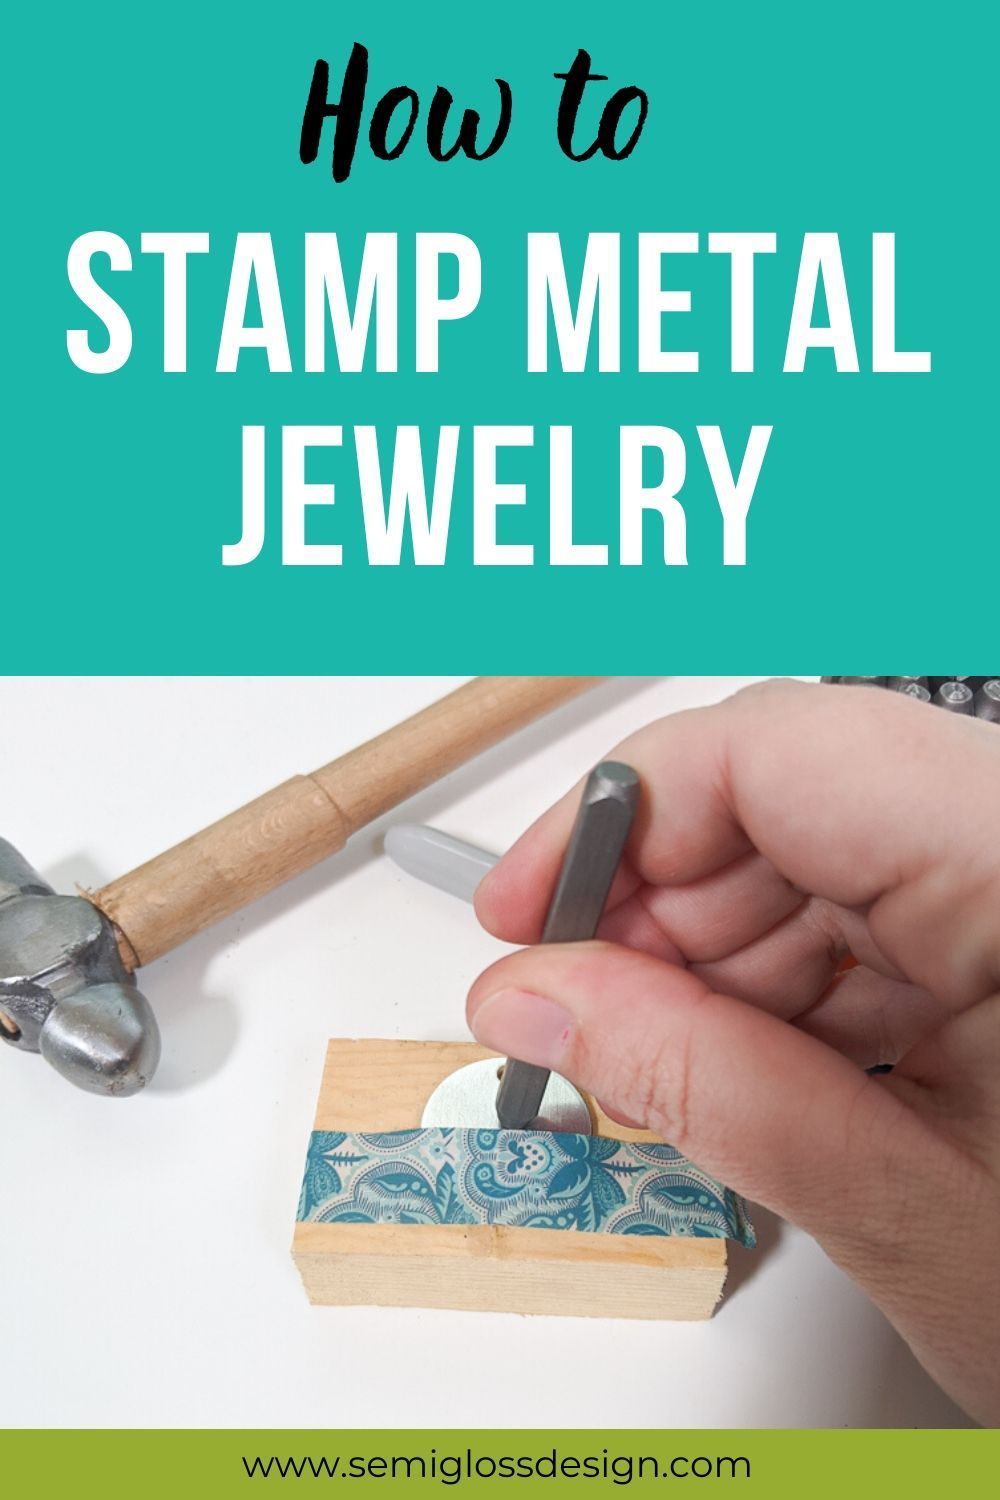 Easy Gift Idea: How to Stamp Metal Jewelry - Semigloss Design - Easy Gift Idea: How to Stamp Metal Jewelry - Semigloss Design -   17 diy Jewelry gifts ideas